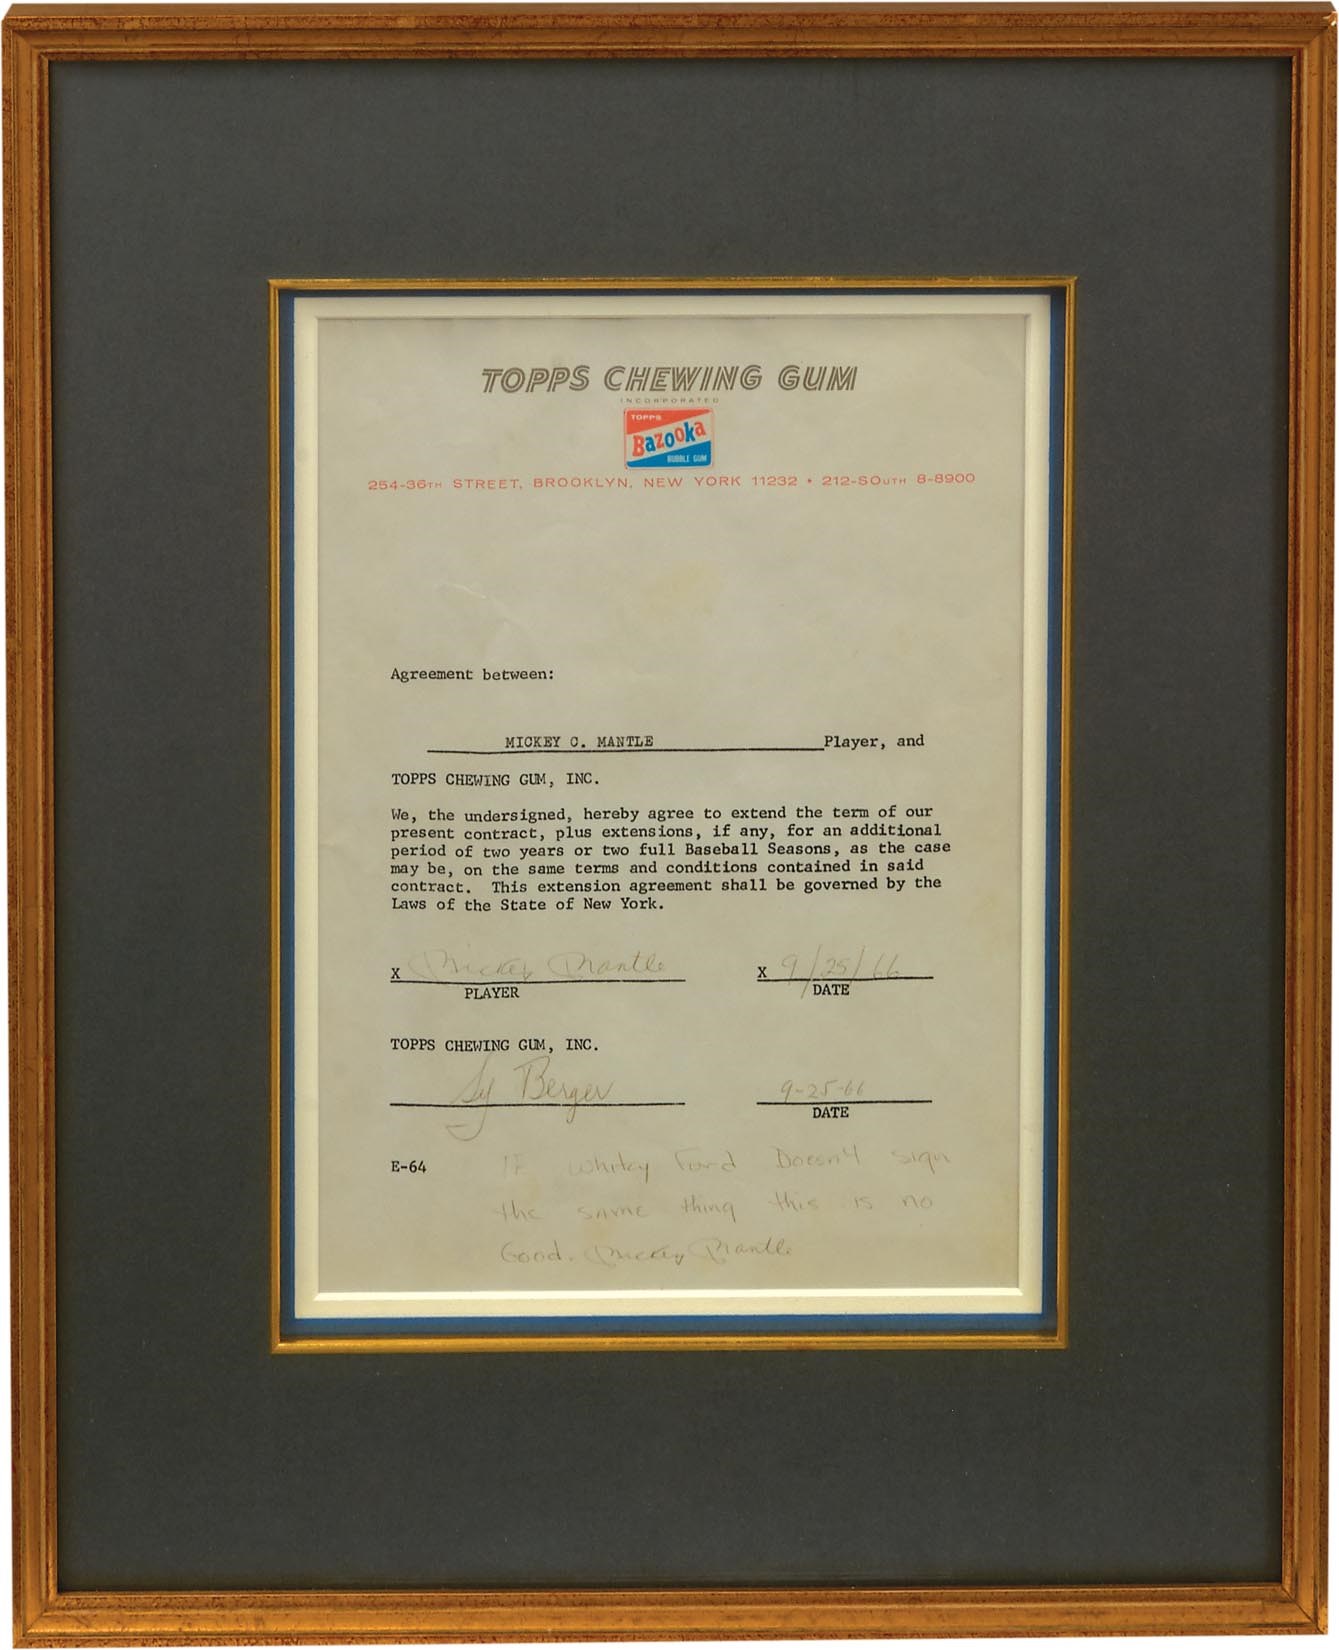 1966 Mickey Mantle Topps Signed Baseball Card Contract (PSA)